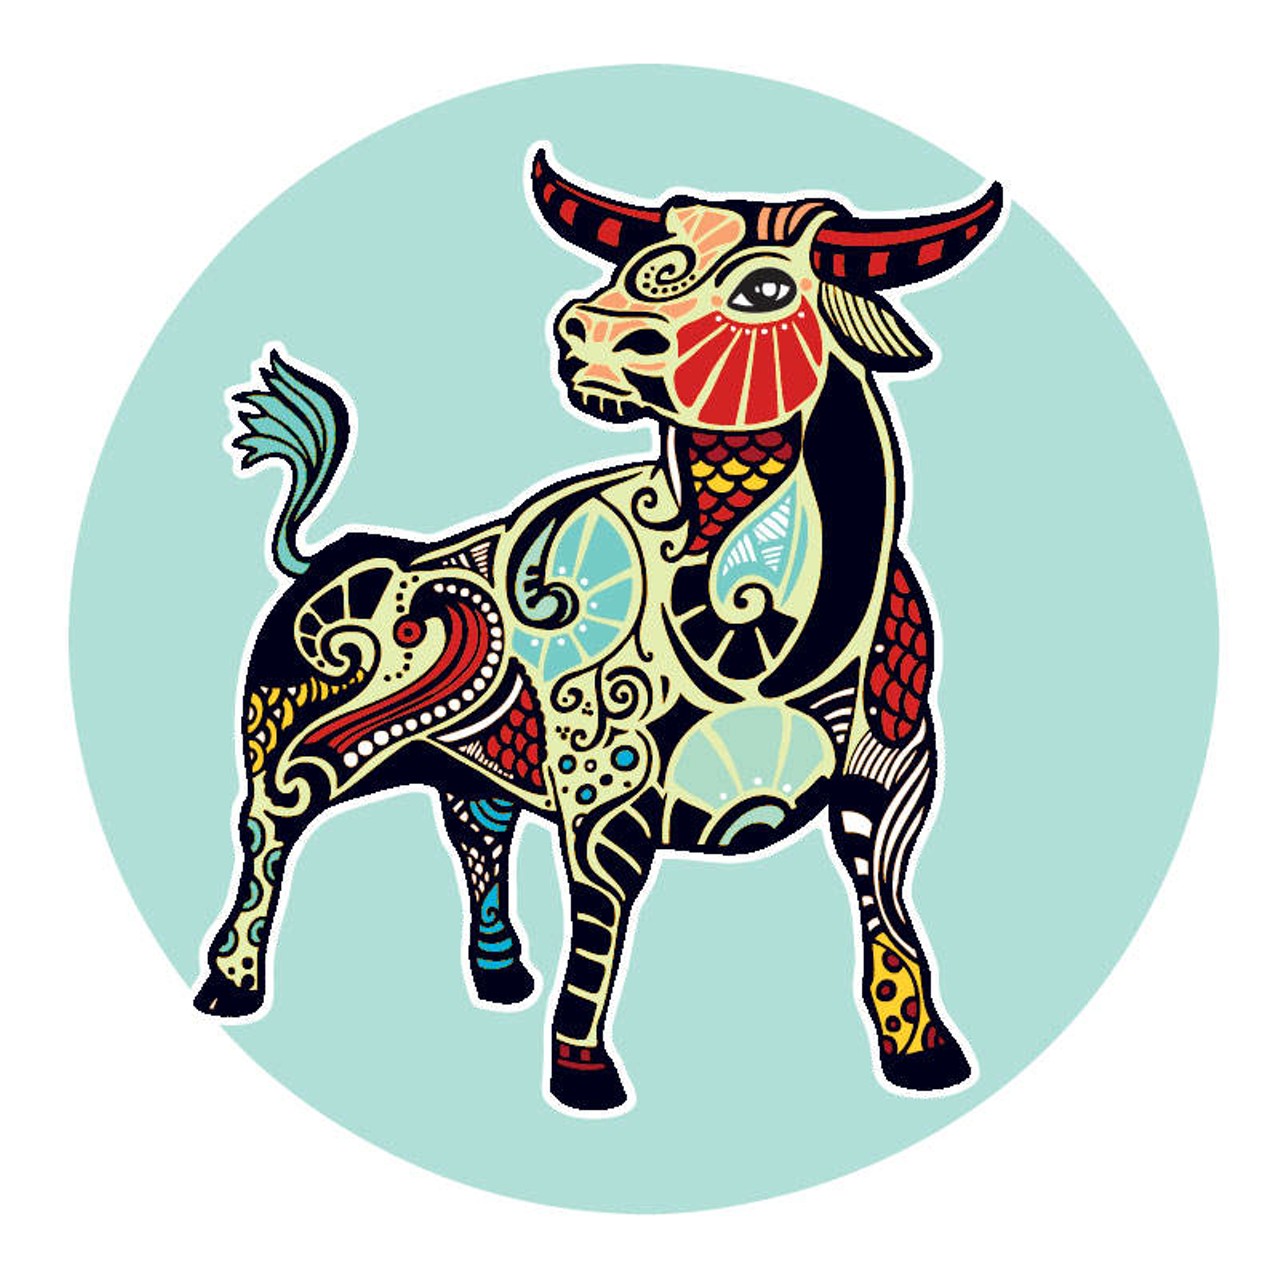 TAURUS (April 21 -May 20): 
You have had it up to here with people and their BS. It&#146;s a good thing that you have X-ray vision and the patience of a saint. If it&#146;s easier to see through people than it is to forgive them, do the best you can. Those closest to you are going through the gauntlet. Their issues will keep them too occupied to really be 100 percent there for you. Don&#146;t let it bring you down. You are their rock. So much hinges on you staying centered. Use this time to focus on what you love and do what brings you joy. Don&#146;t pay attention to anything that undermines your spirit, and keep your light on.